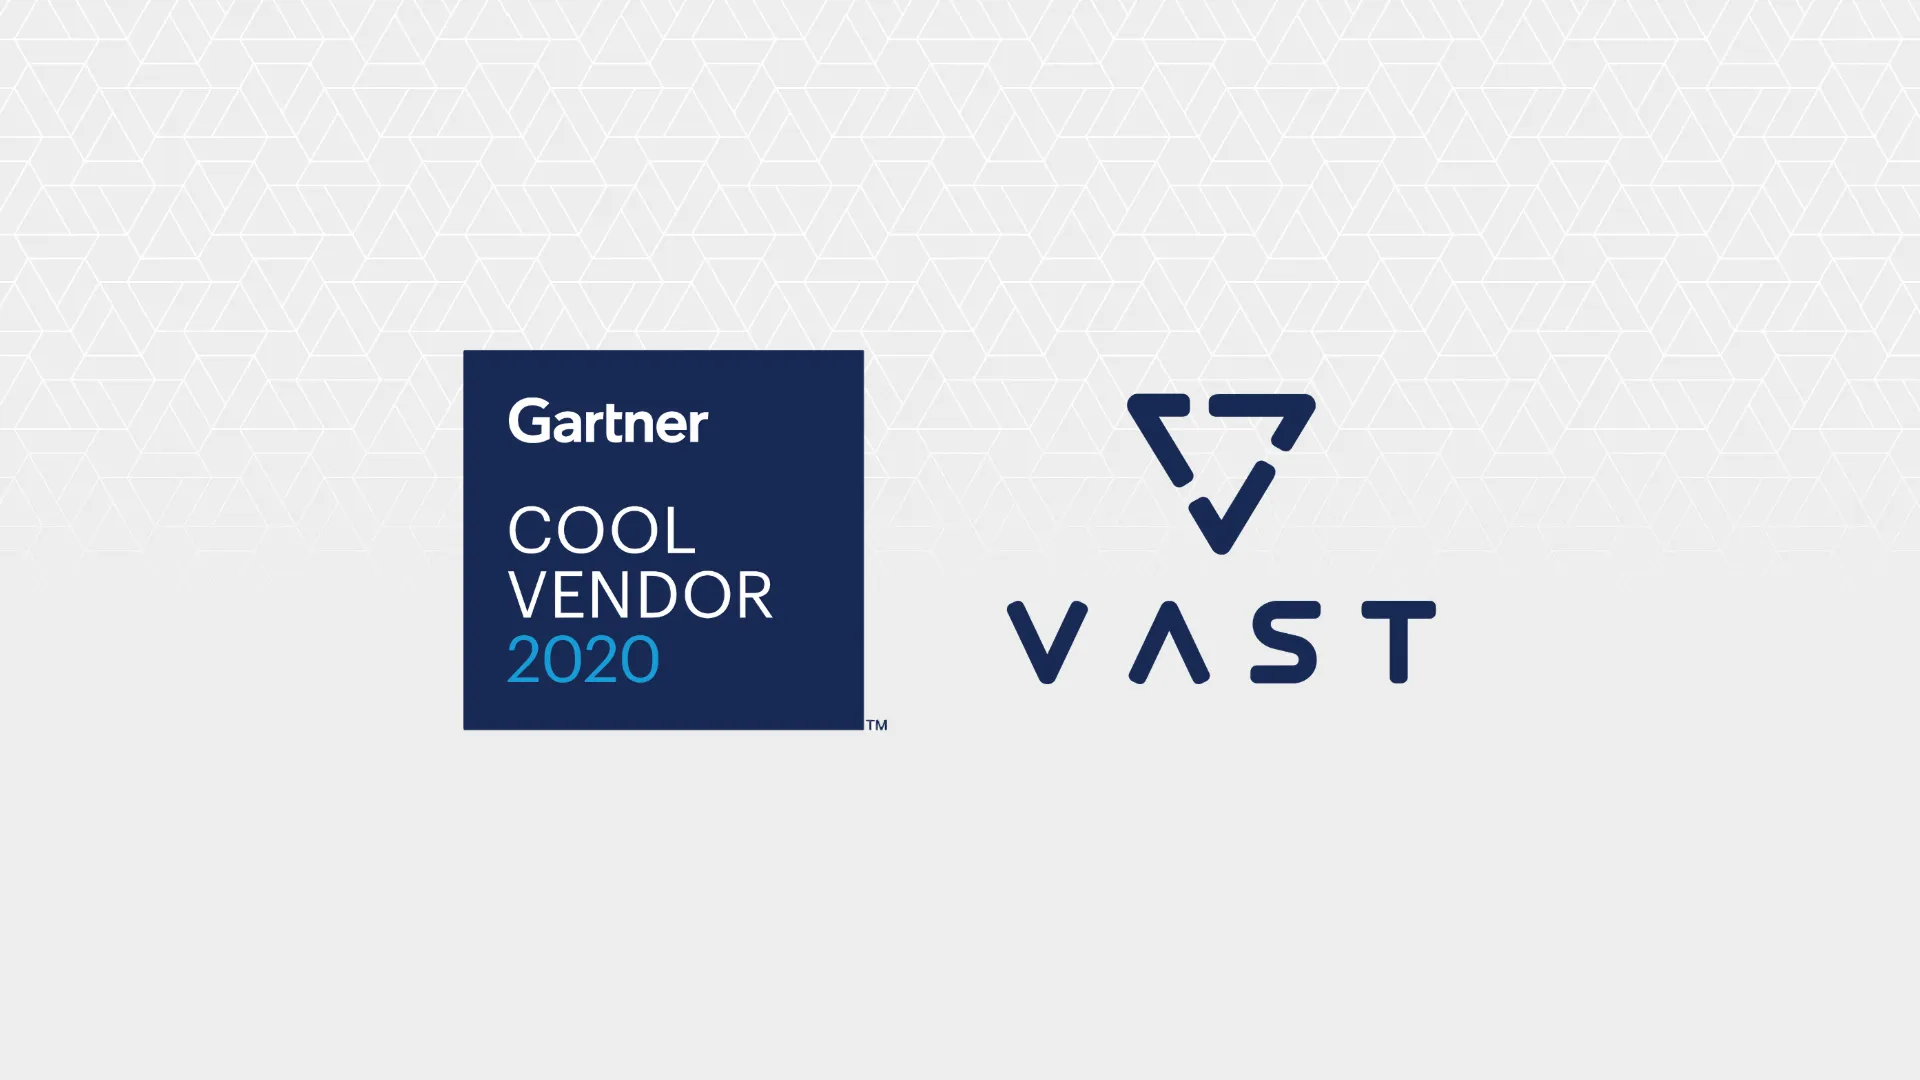 VAST Data Named a Cool Vendor in the Gartner 2020 “Cool Vendors in Storage and Backup and Recovery” Report